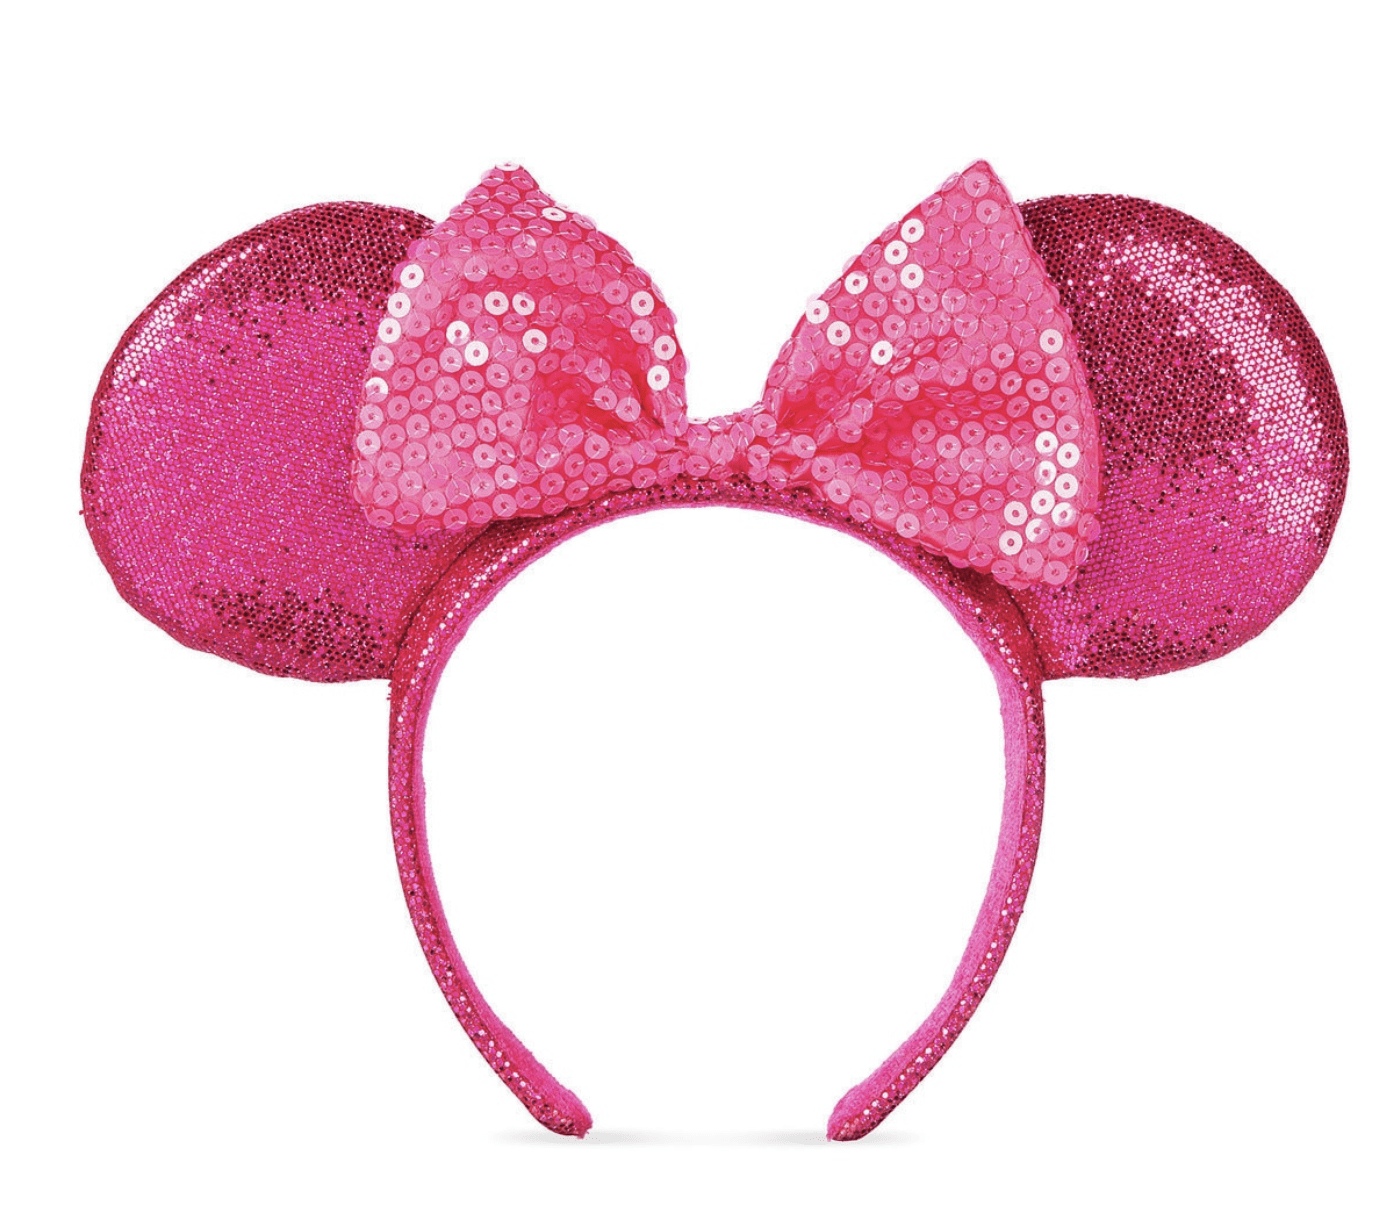 NEW Disney Parks Jewelry Minnie Mouse Headband Necklace Imagination Pink 